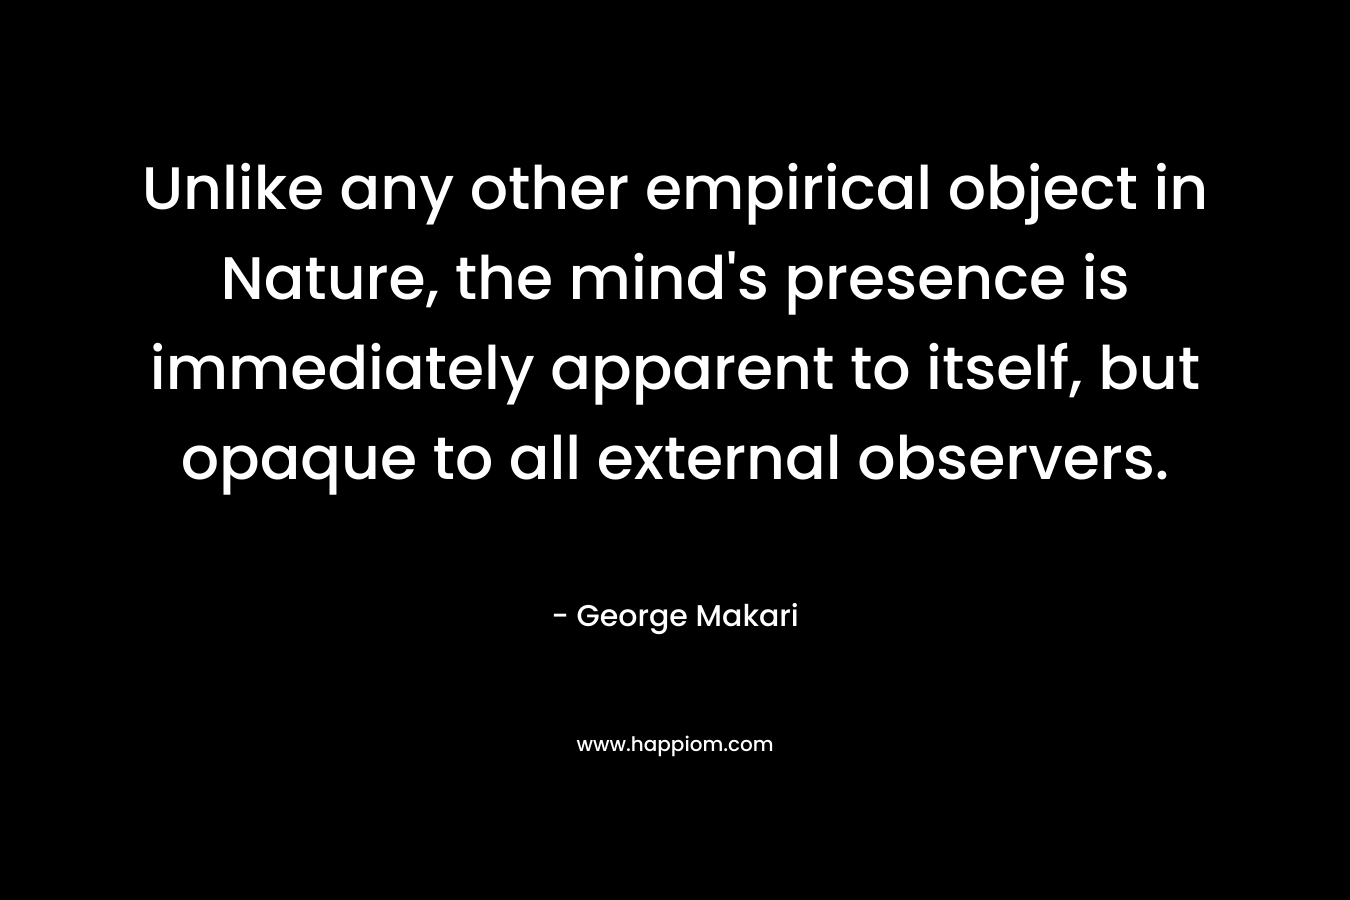 Unlike any other empirical object in Nature, the mind’s presence is immediately apparent to itself, but opaque to all external observers. – George Makari